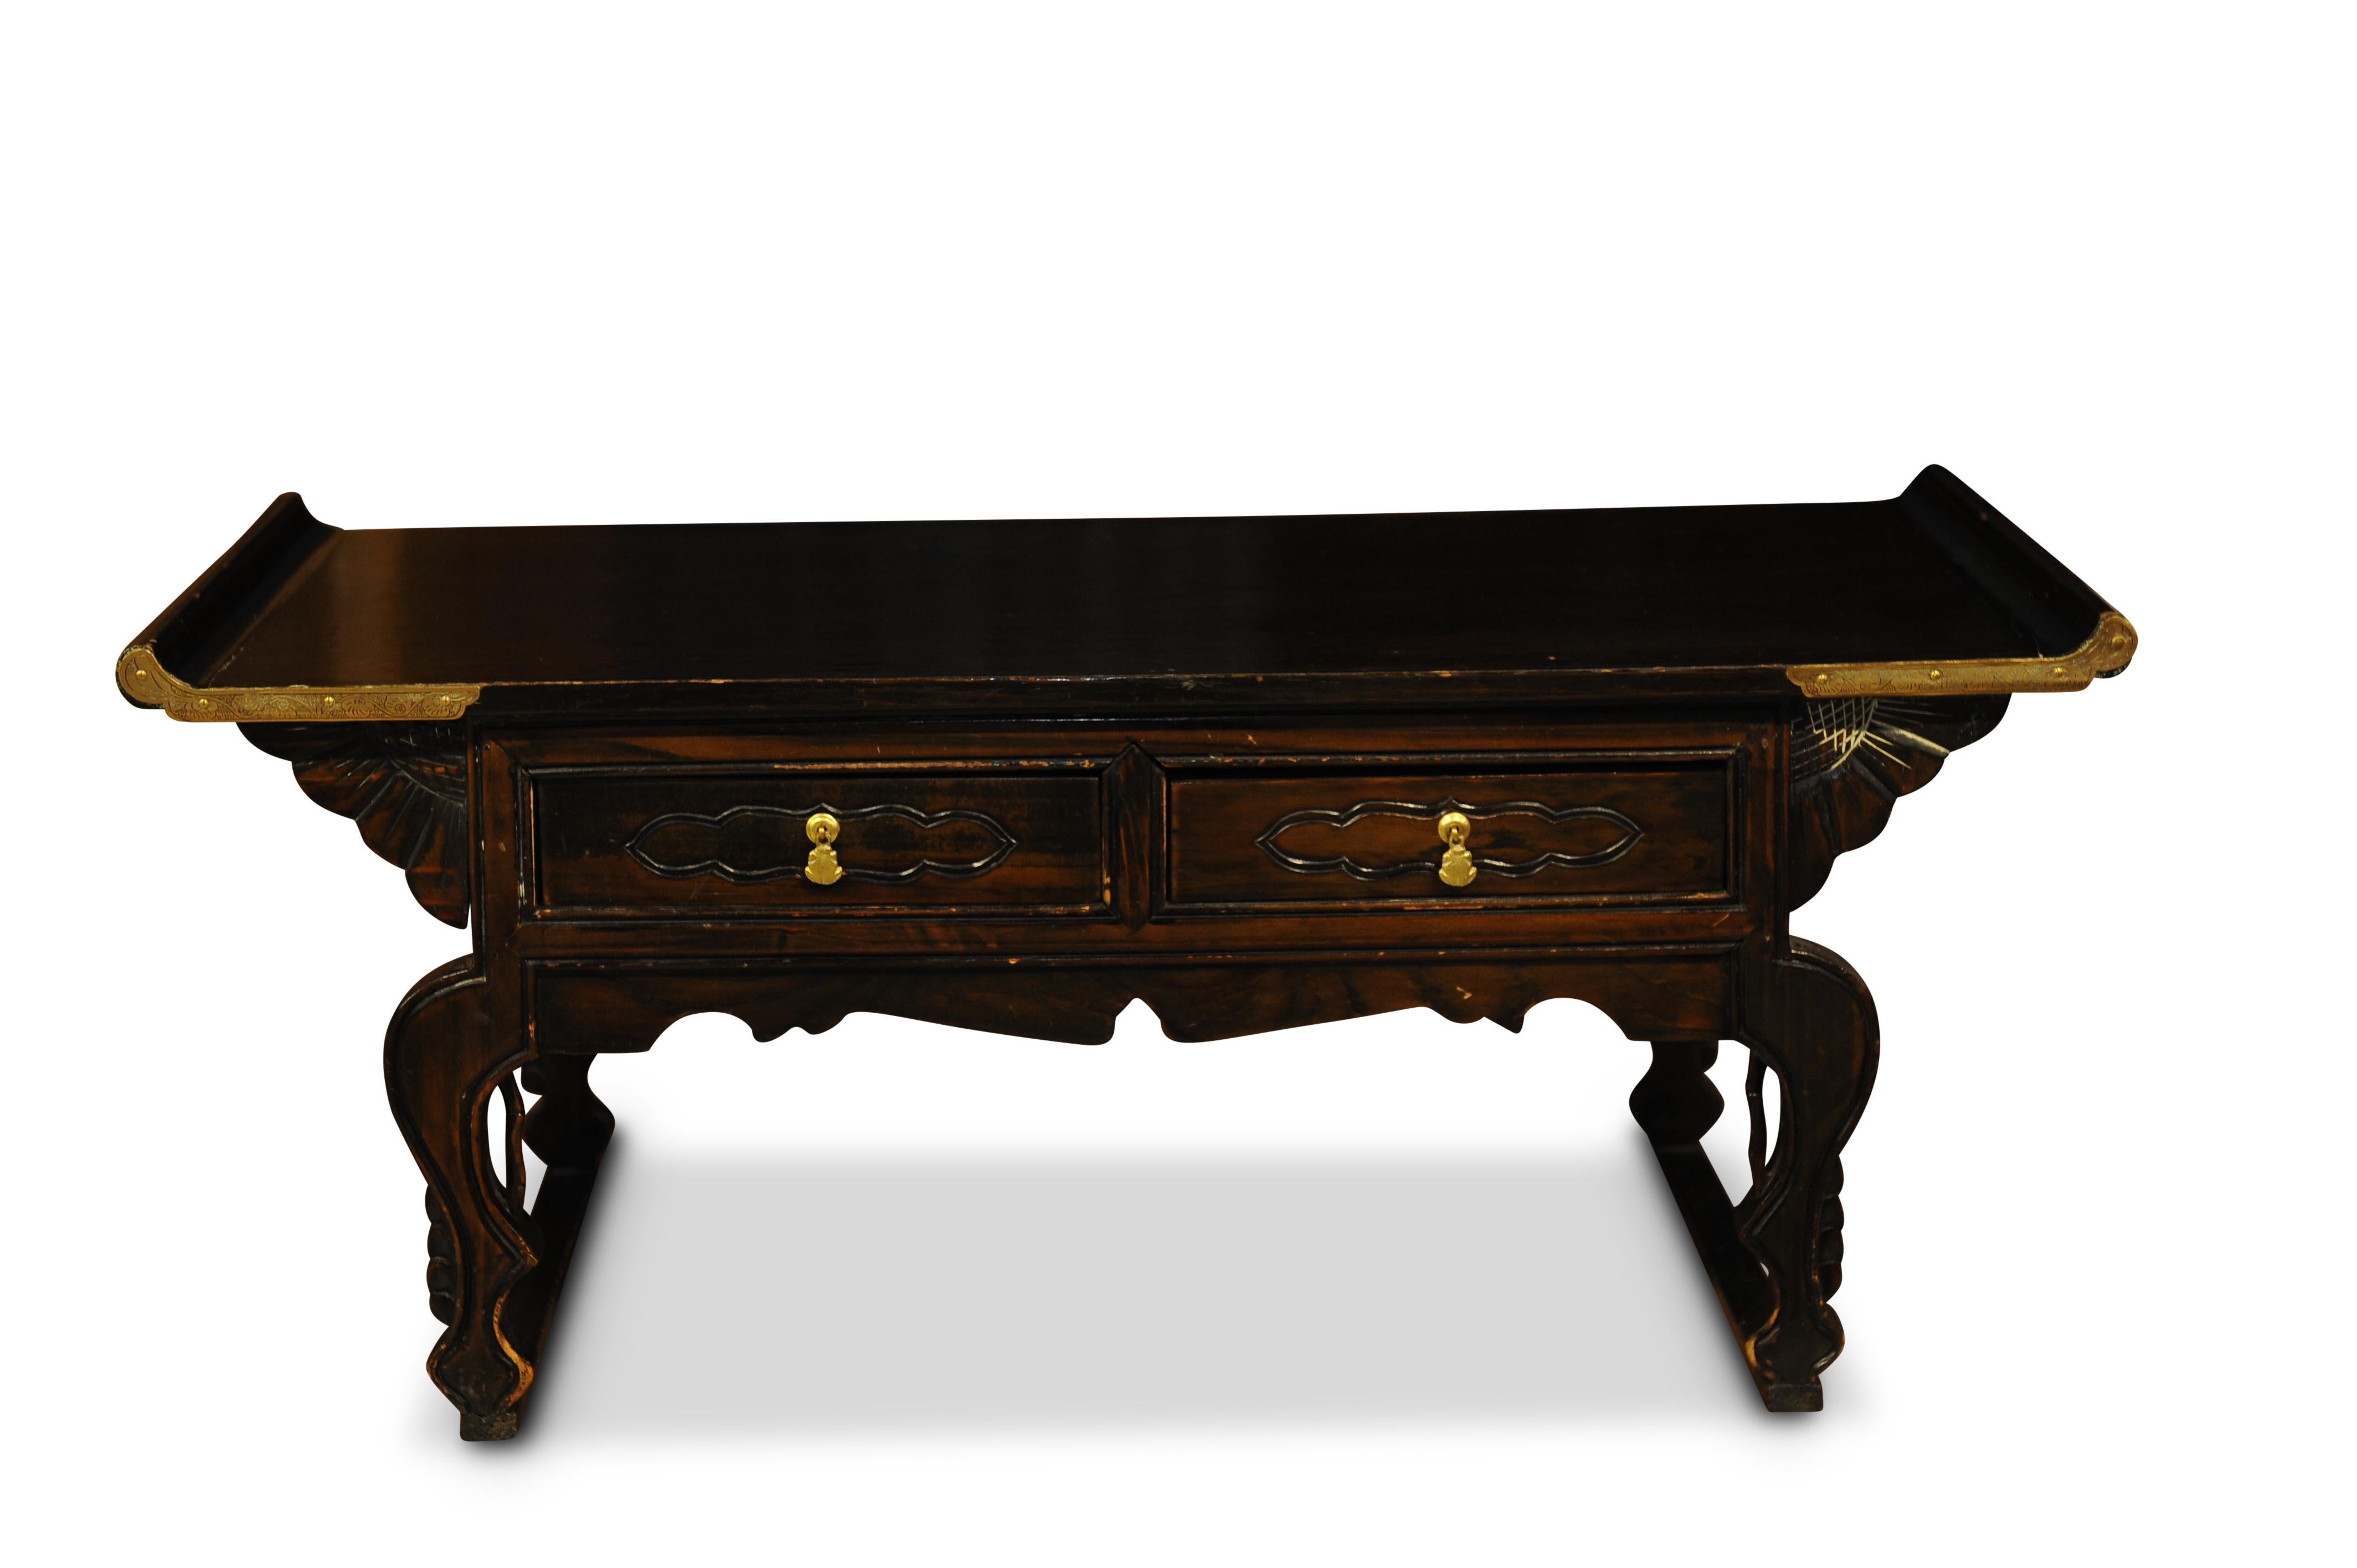 Victorian 19th century symmetrical black lacquered low Chinese export altar table with two drawers.

The piece has been left unrestored and remains in it's original form.